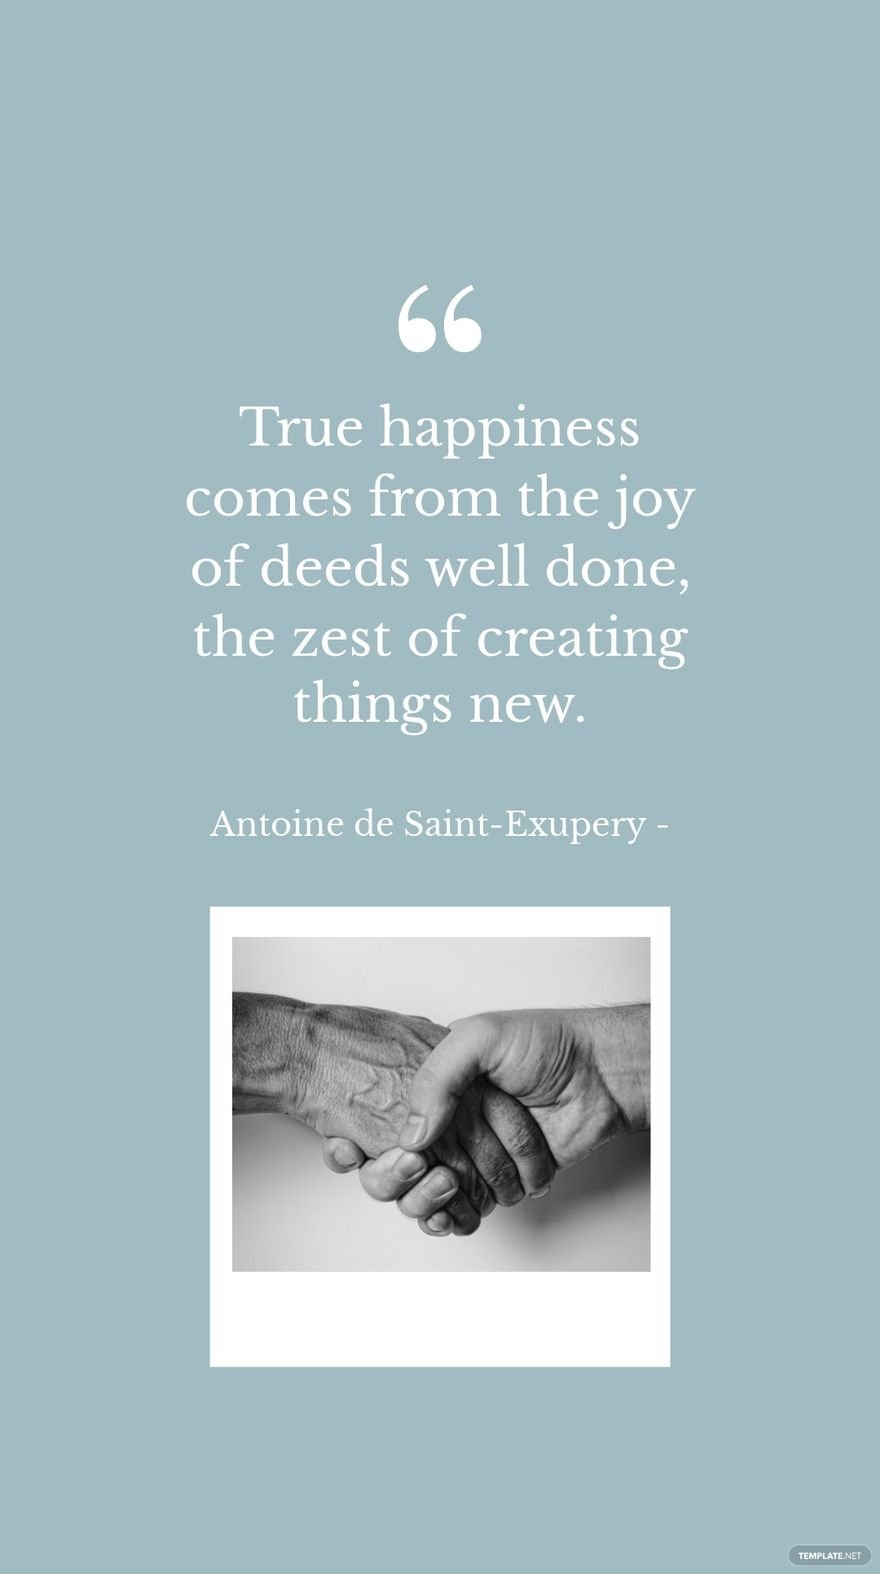 Antoine de Saint-Exupery - True happiness comes from the joy of deeds well done, the zest of creating things new. in JPG